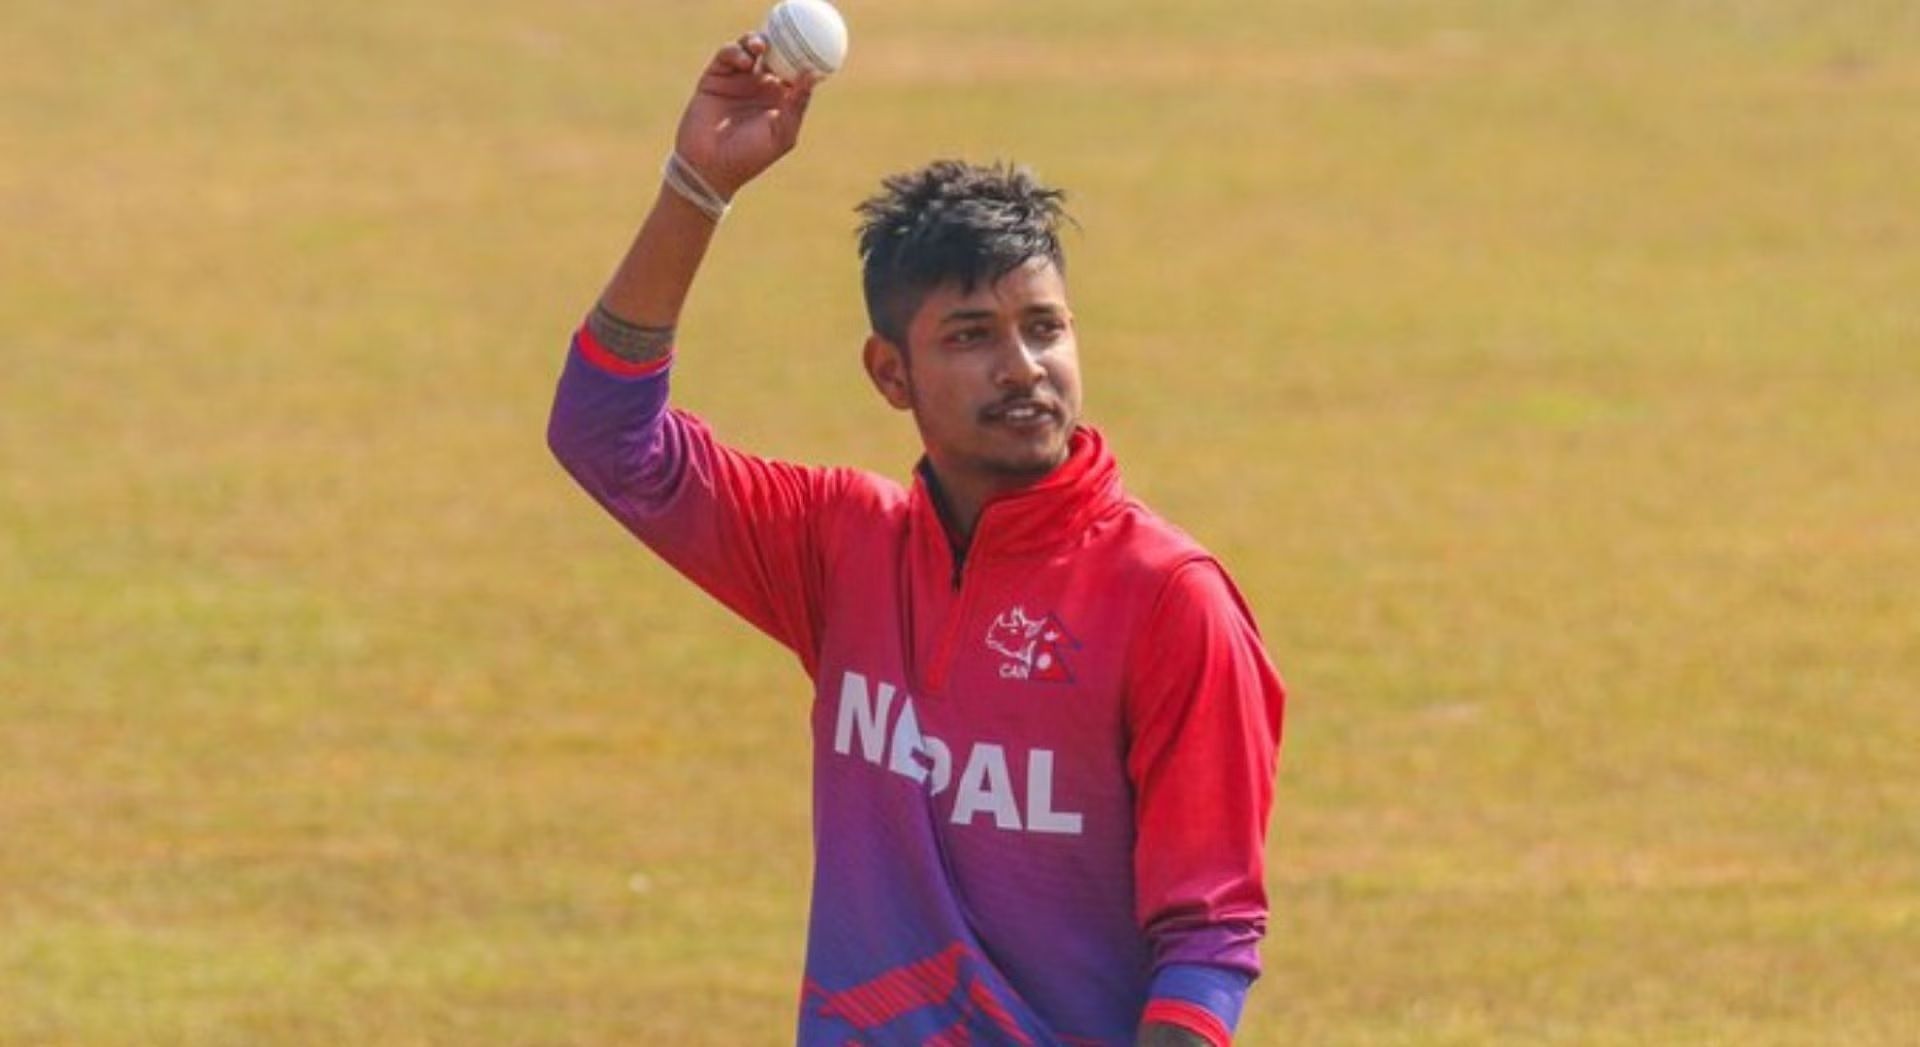 Sandeep Lamichhane is expected to lead Nepal